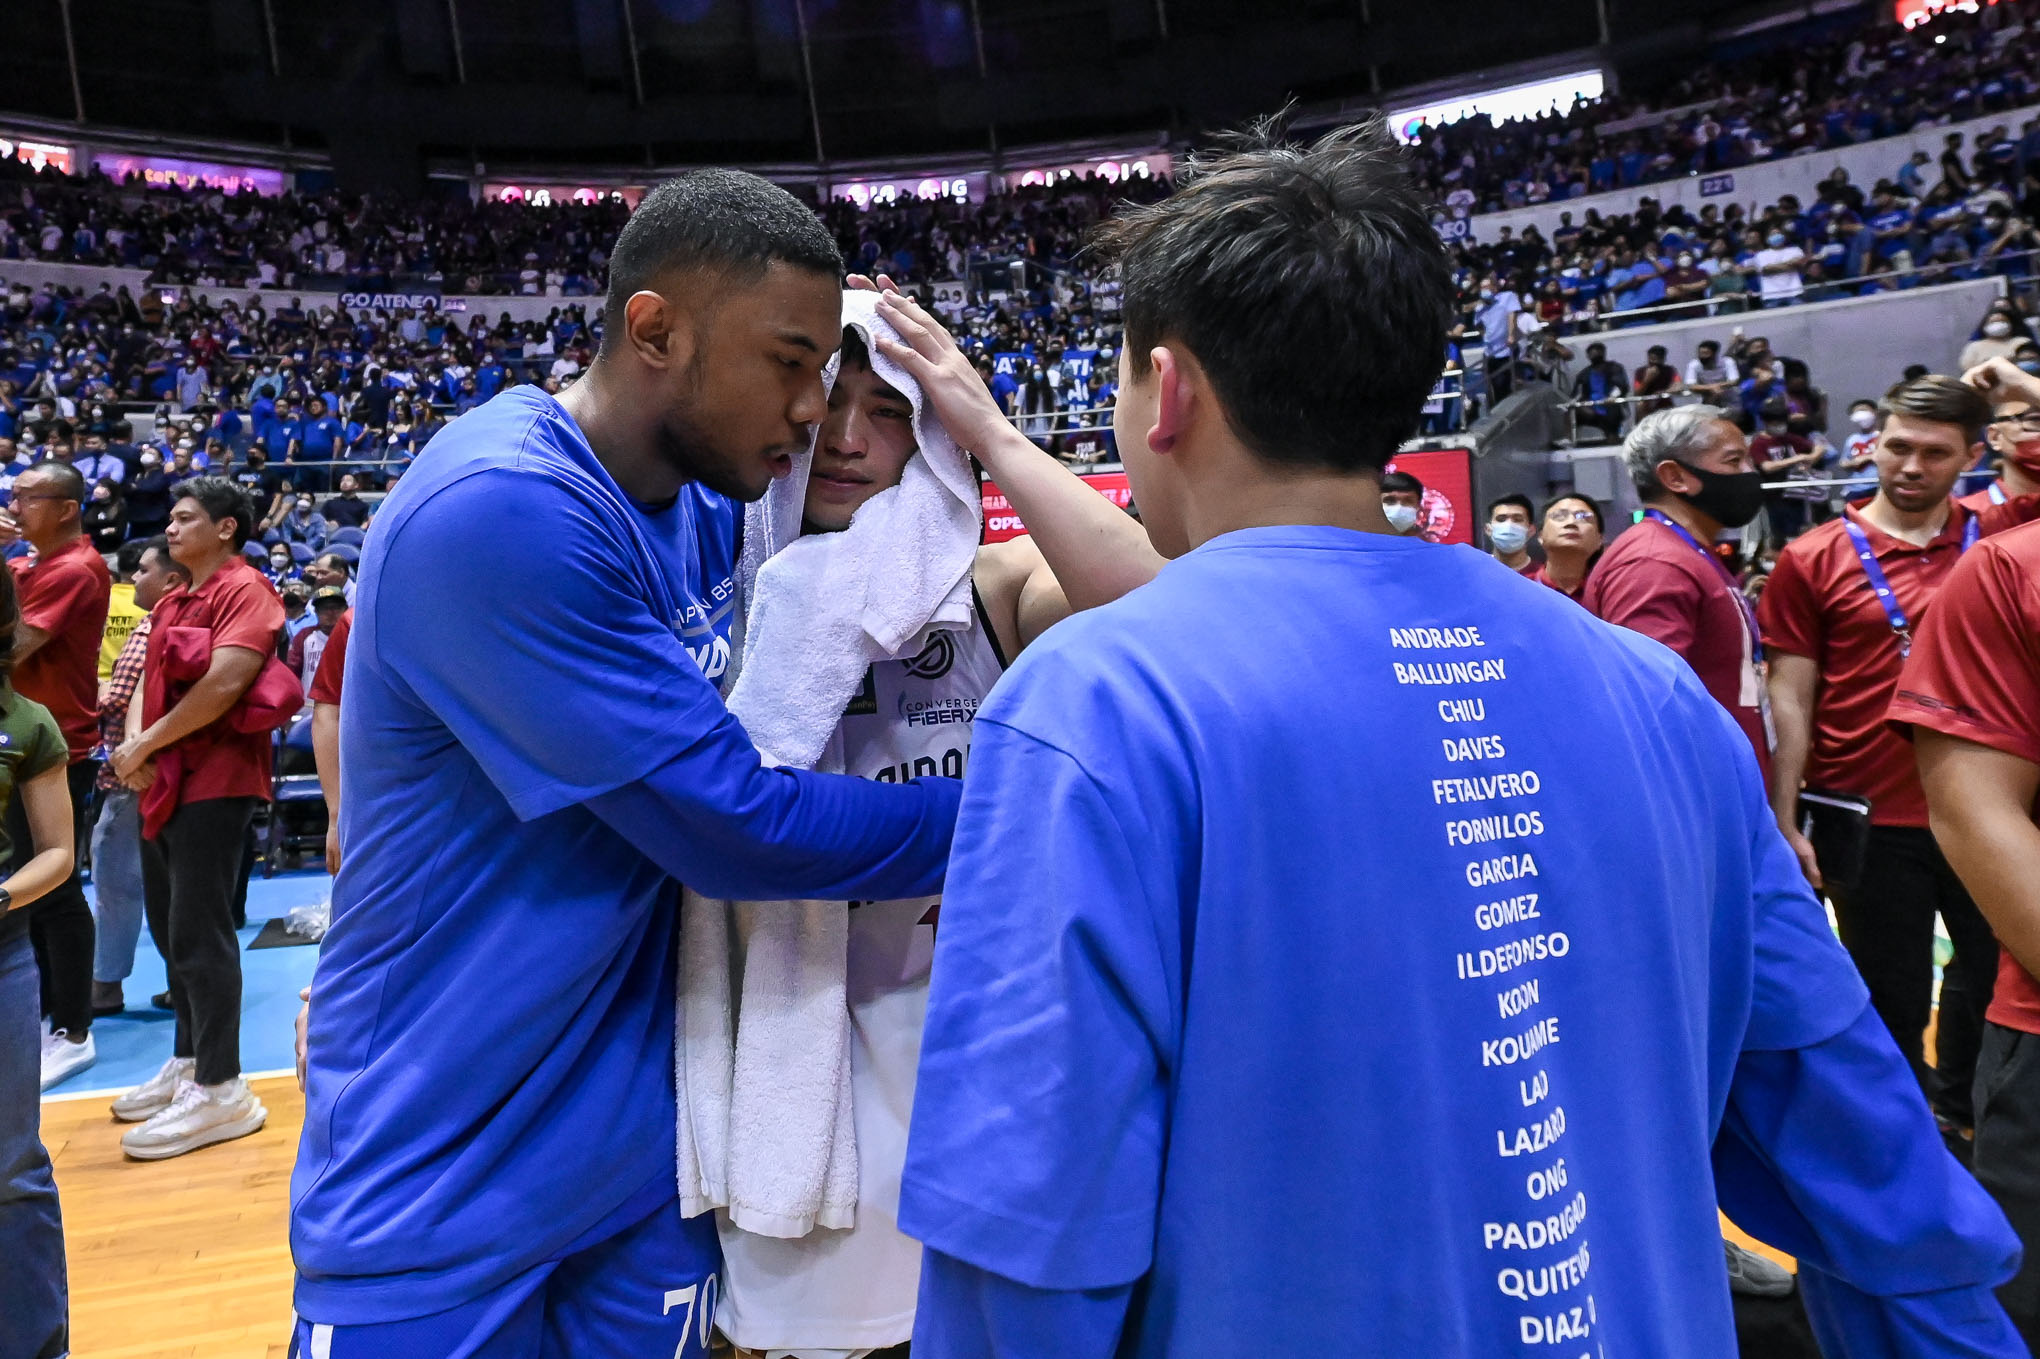 UAAP85-MBB-JD-CAGULANGAN Jacob Lao gives back to Ateneo by donating to coaches, scholar-athlete funds ADMU Basketball News UAAP  - philippine sports news